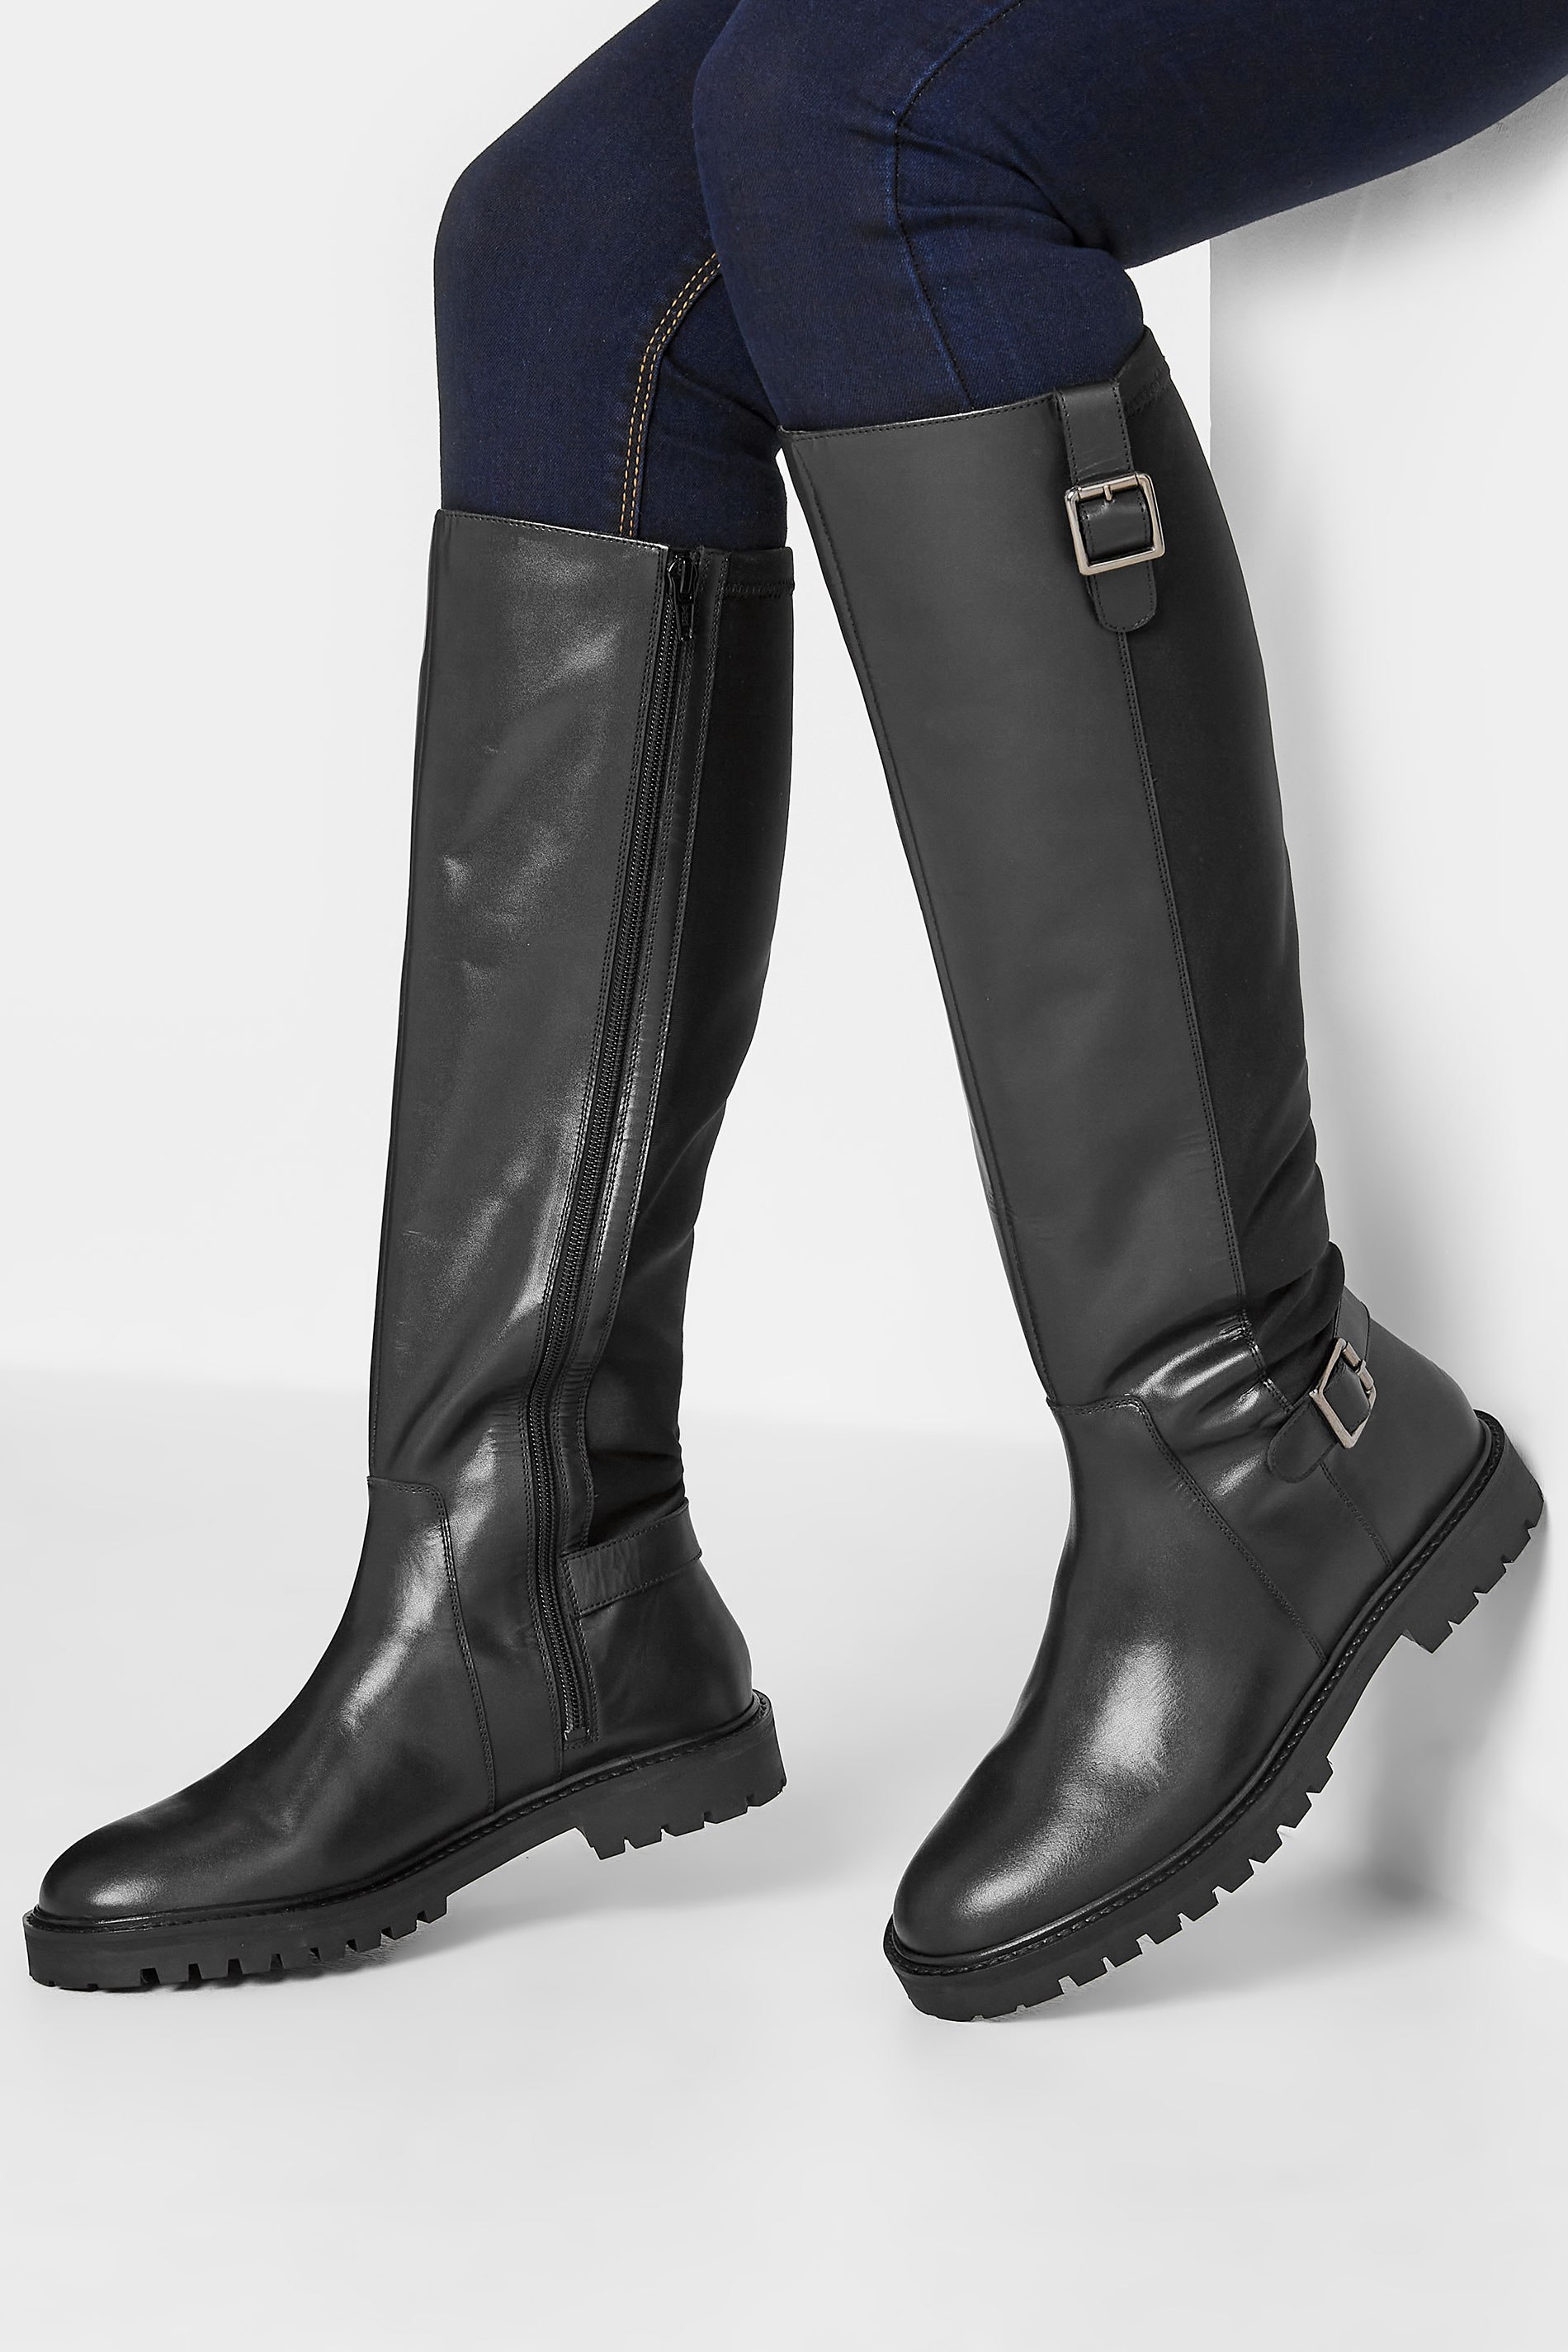 LTS Black Buckle Leather Knee High Boots In Standard Fit | Long Tall Sally 1